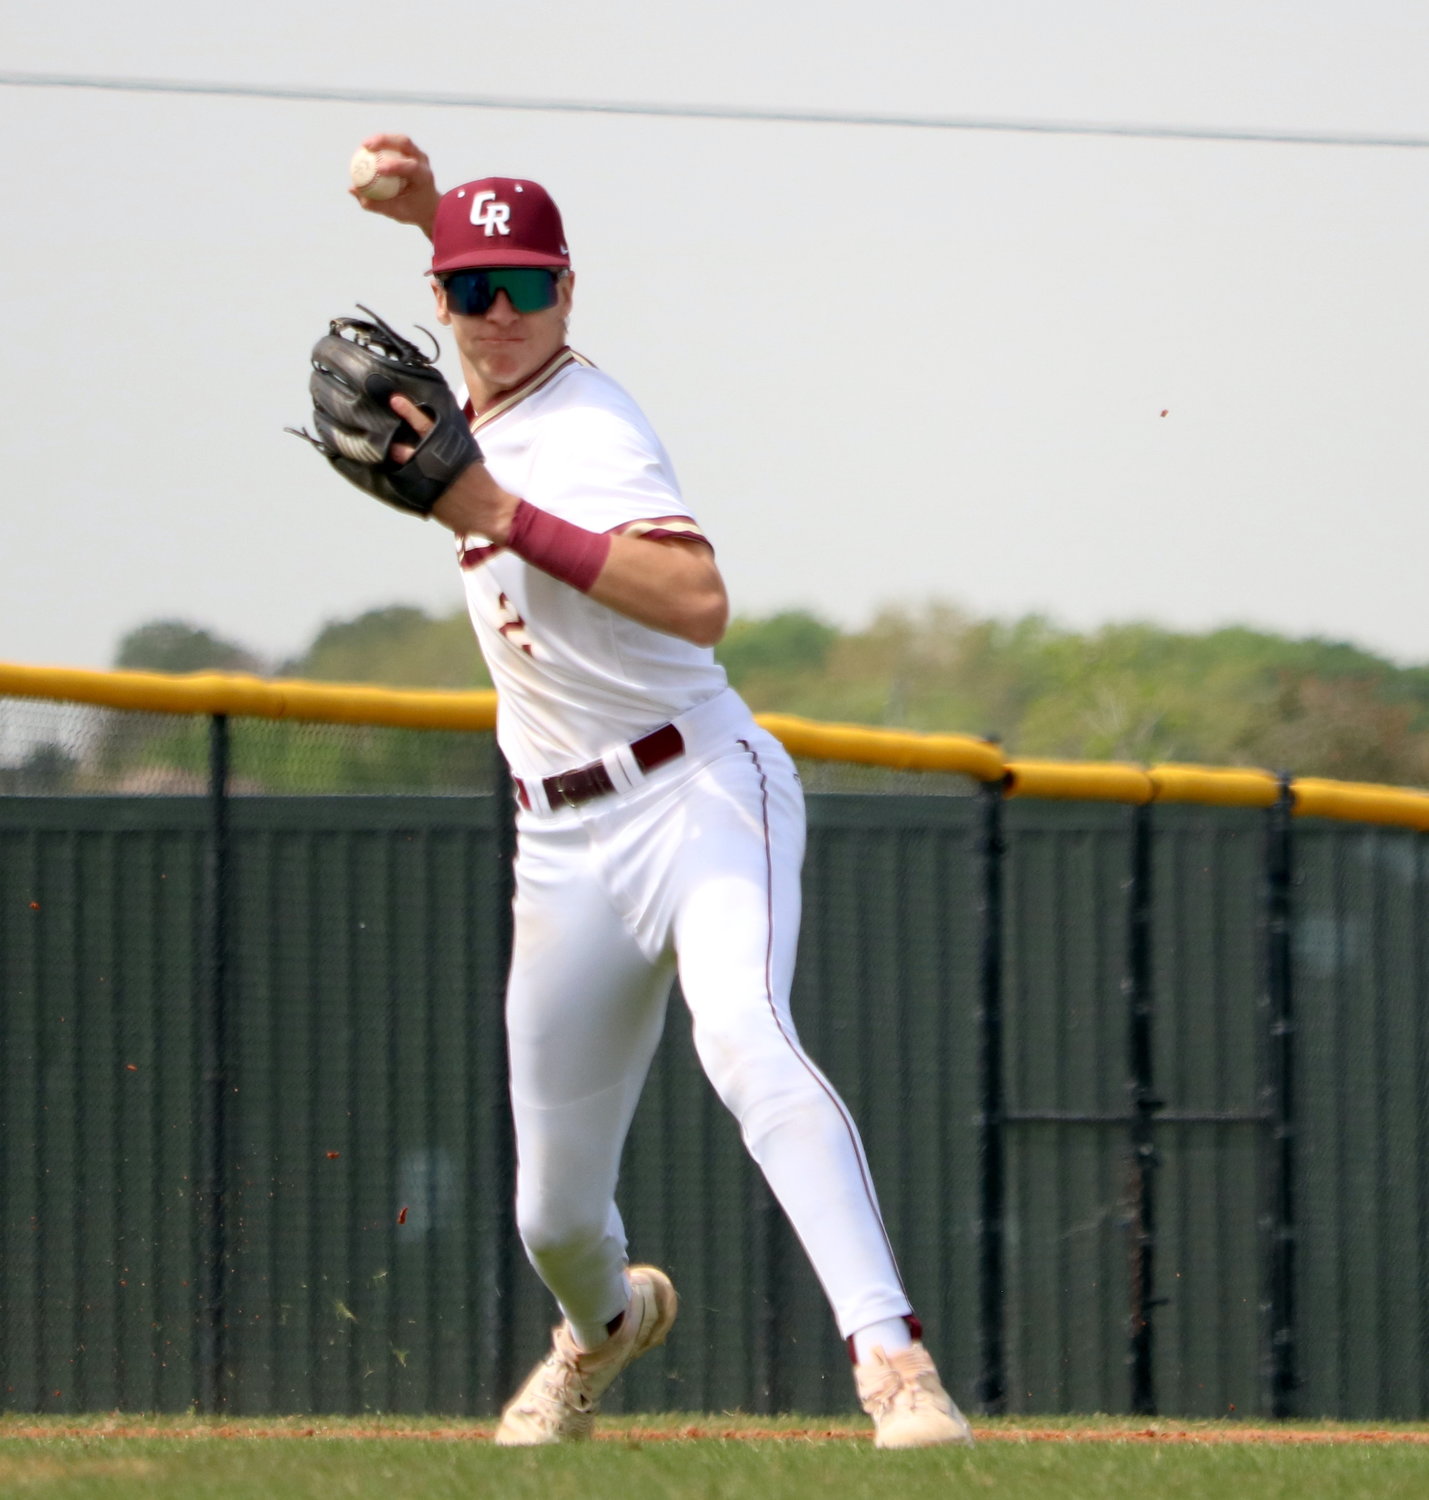 Lucas Franco throws the ball to first base during Tuesday's game between Tompkins and Cinco Ranch at the Cinco Ranch baseball field.